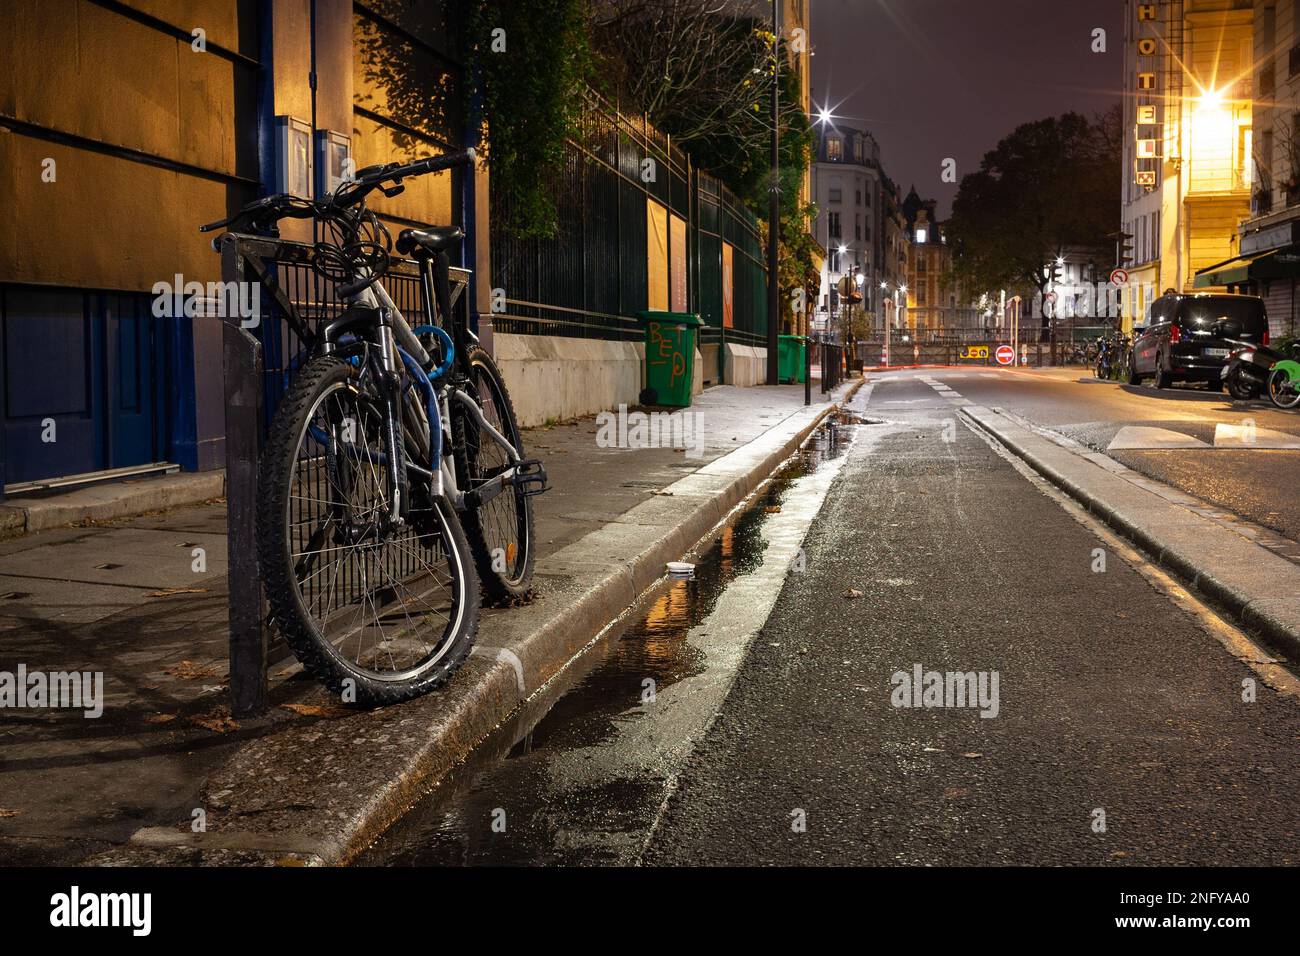 A broken bike on the side of a road Stock Photo